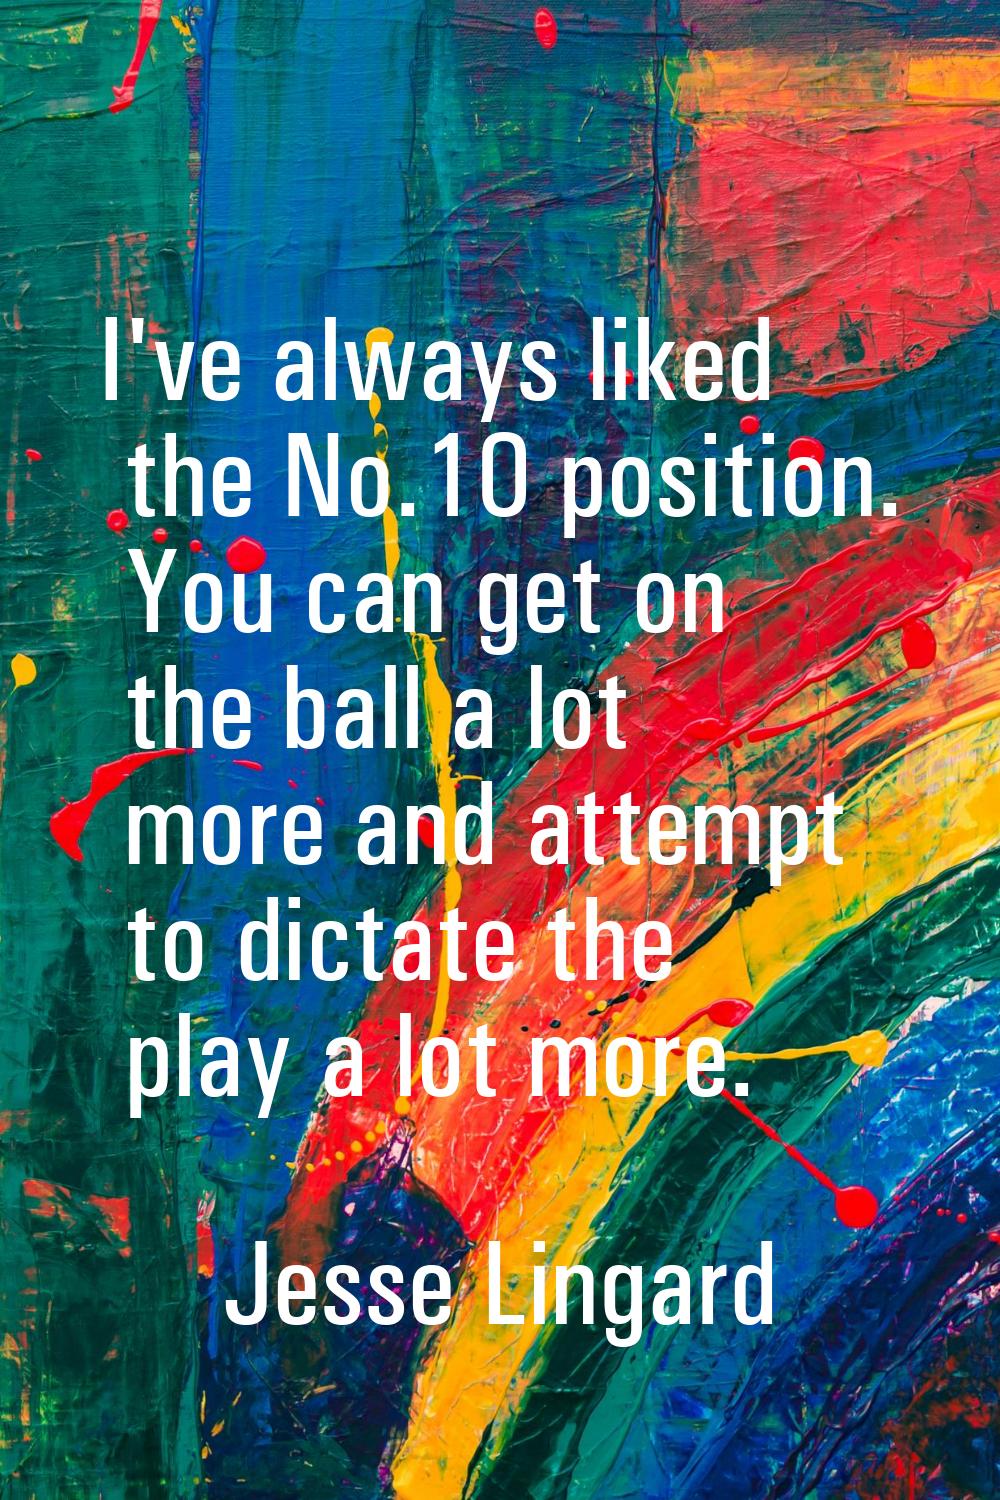 I've always liked the No.10 position. You can get on the ball a lot more and attempt to dictate the